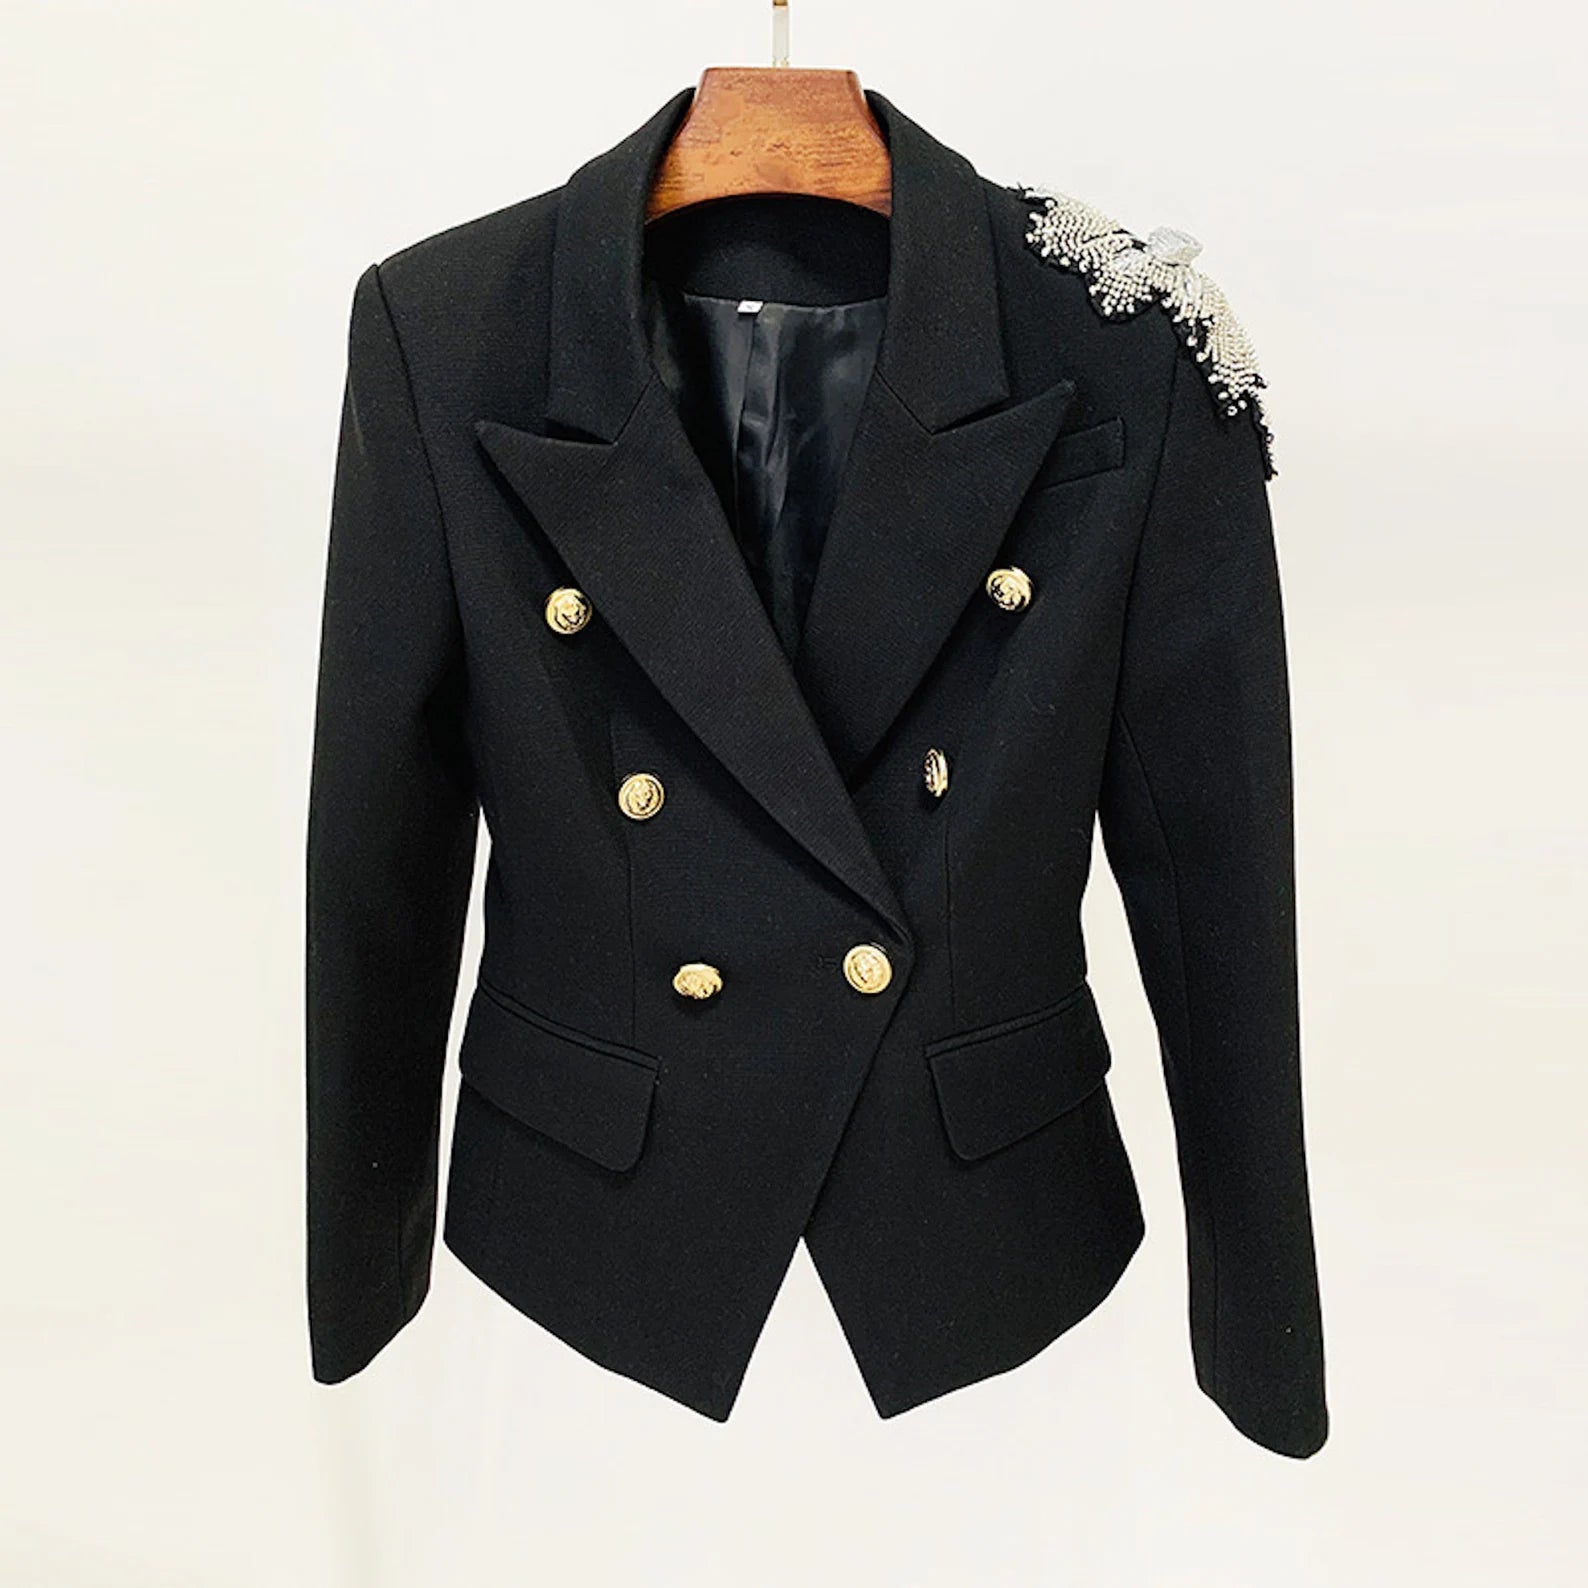 Women's Fitted Special Embroidery Beads Flower Shoulder Decoration Blazer Jacket Black -Classic Black Blazer with Big Beads and Flower Shoulder Decoration is far from dull. This blazer is ideal for evening special occasions, parties, or a daily casual look with jeans, it is popular blazer from our store. Hang dry and low temperature ironing. Hand wash; Do not bleach. Lining : Polyester,  Fastening: Button, Slim, Long Sleeve,2 Buttons front fastening, Long sleeve, Delicate workmanship, decent and attractive.